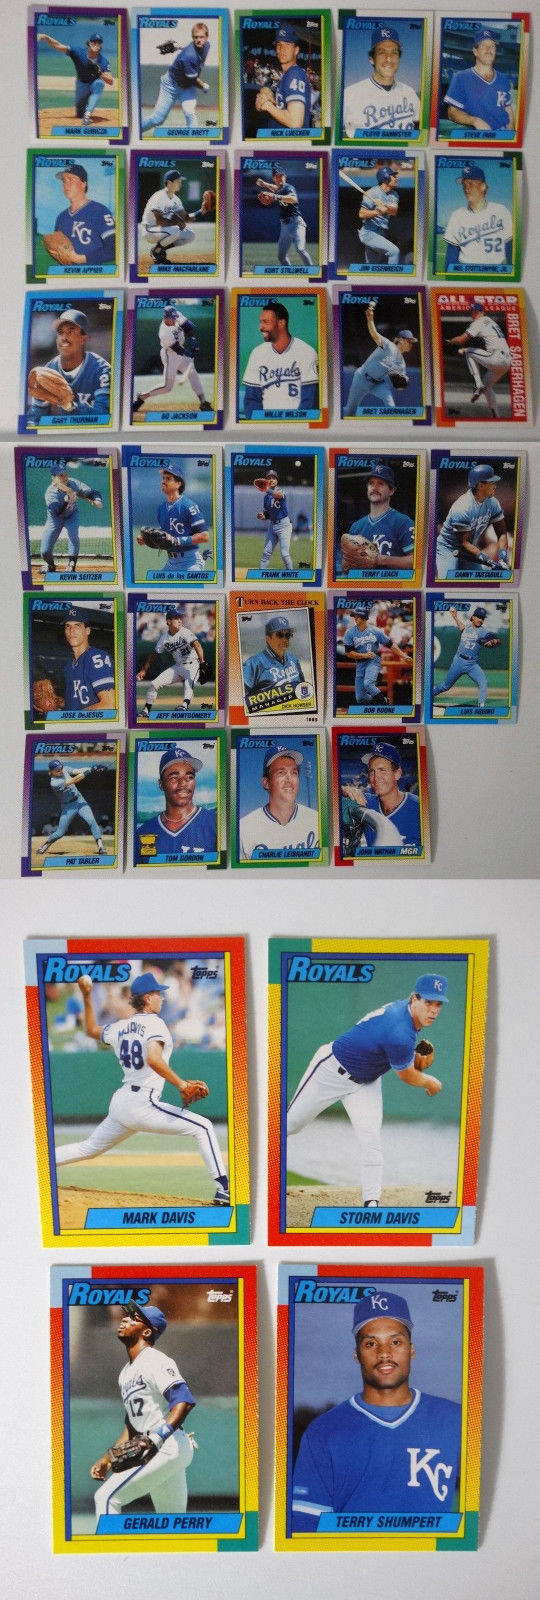 Primary image for 1990 Topps Kansas City Royals Team Set of 33 Baseball Cards W/Traded